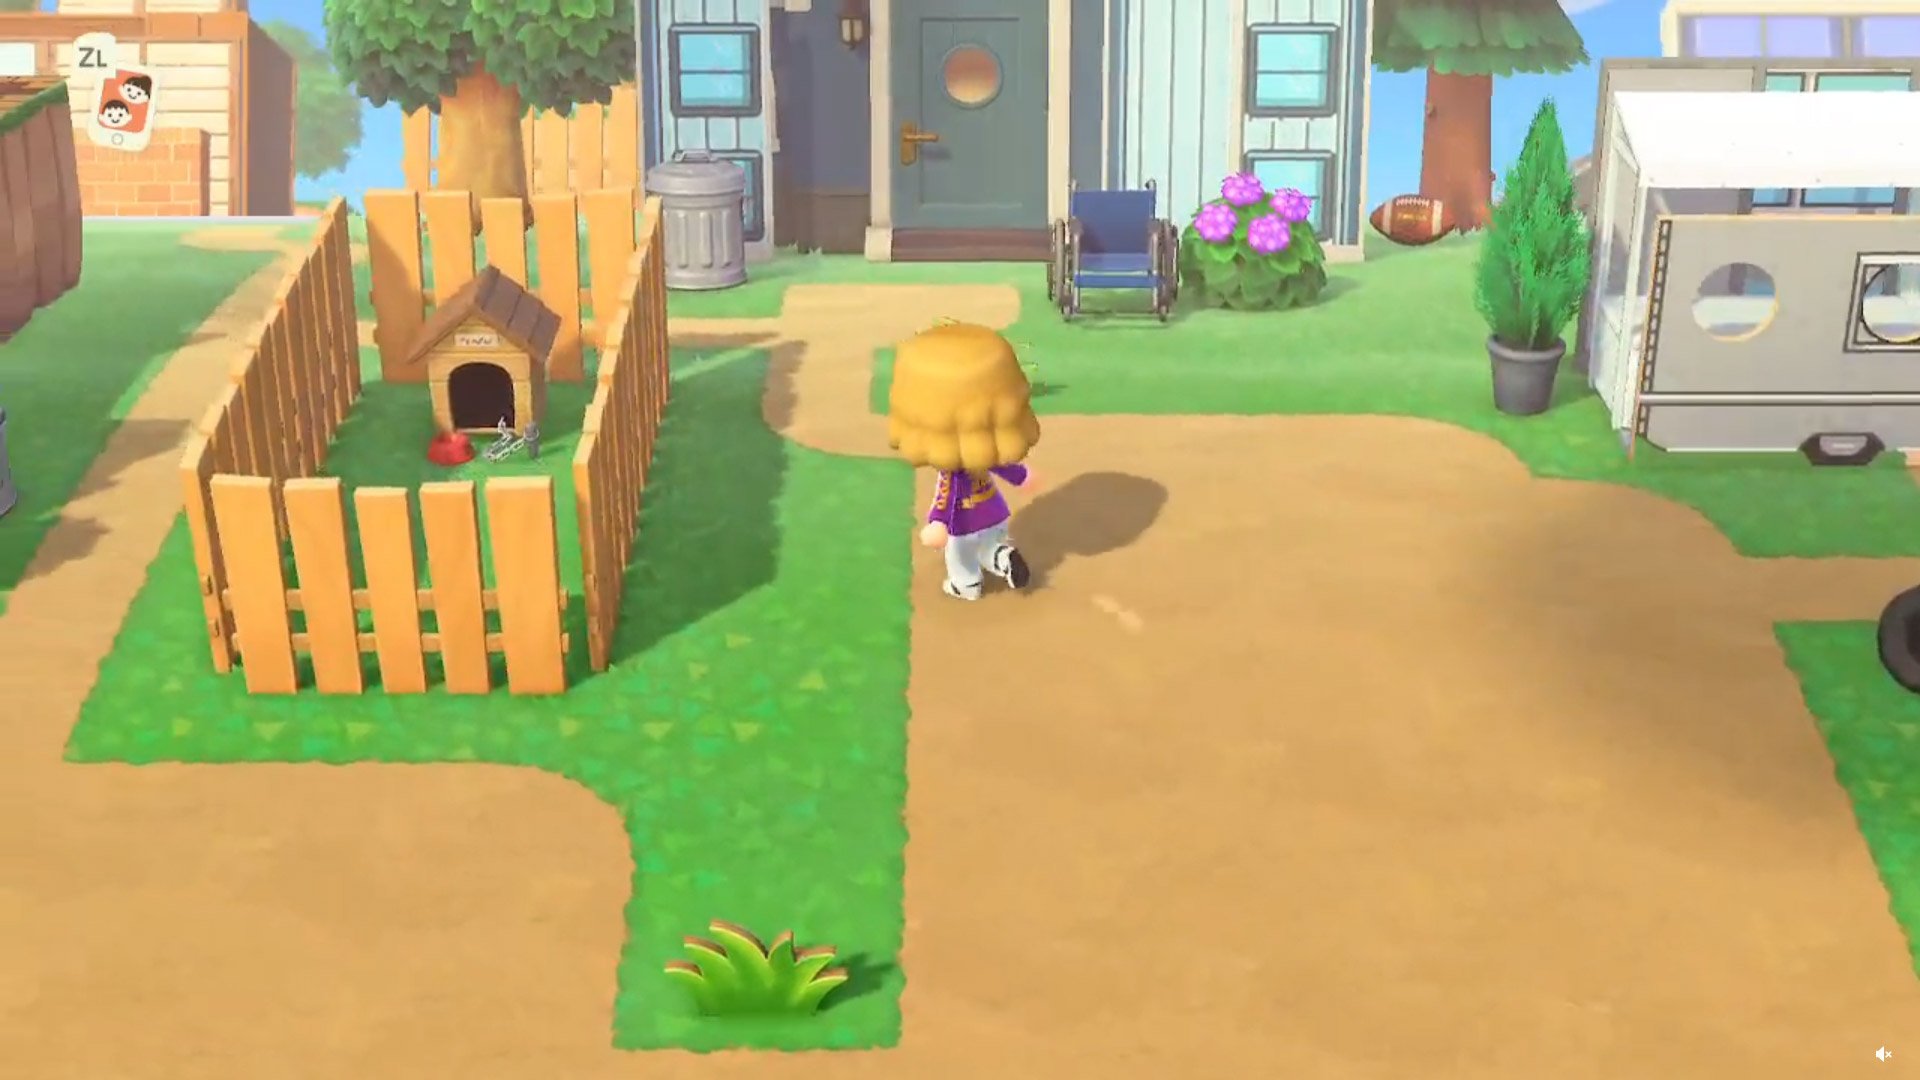 Seeing Stardew Valley’s Pelican Town in Animal Crossing: Recent Horizons is a outing